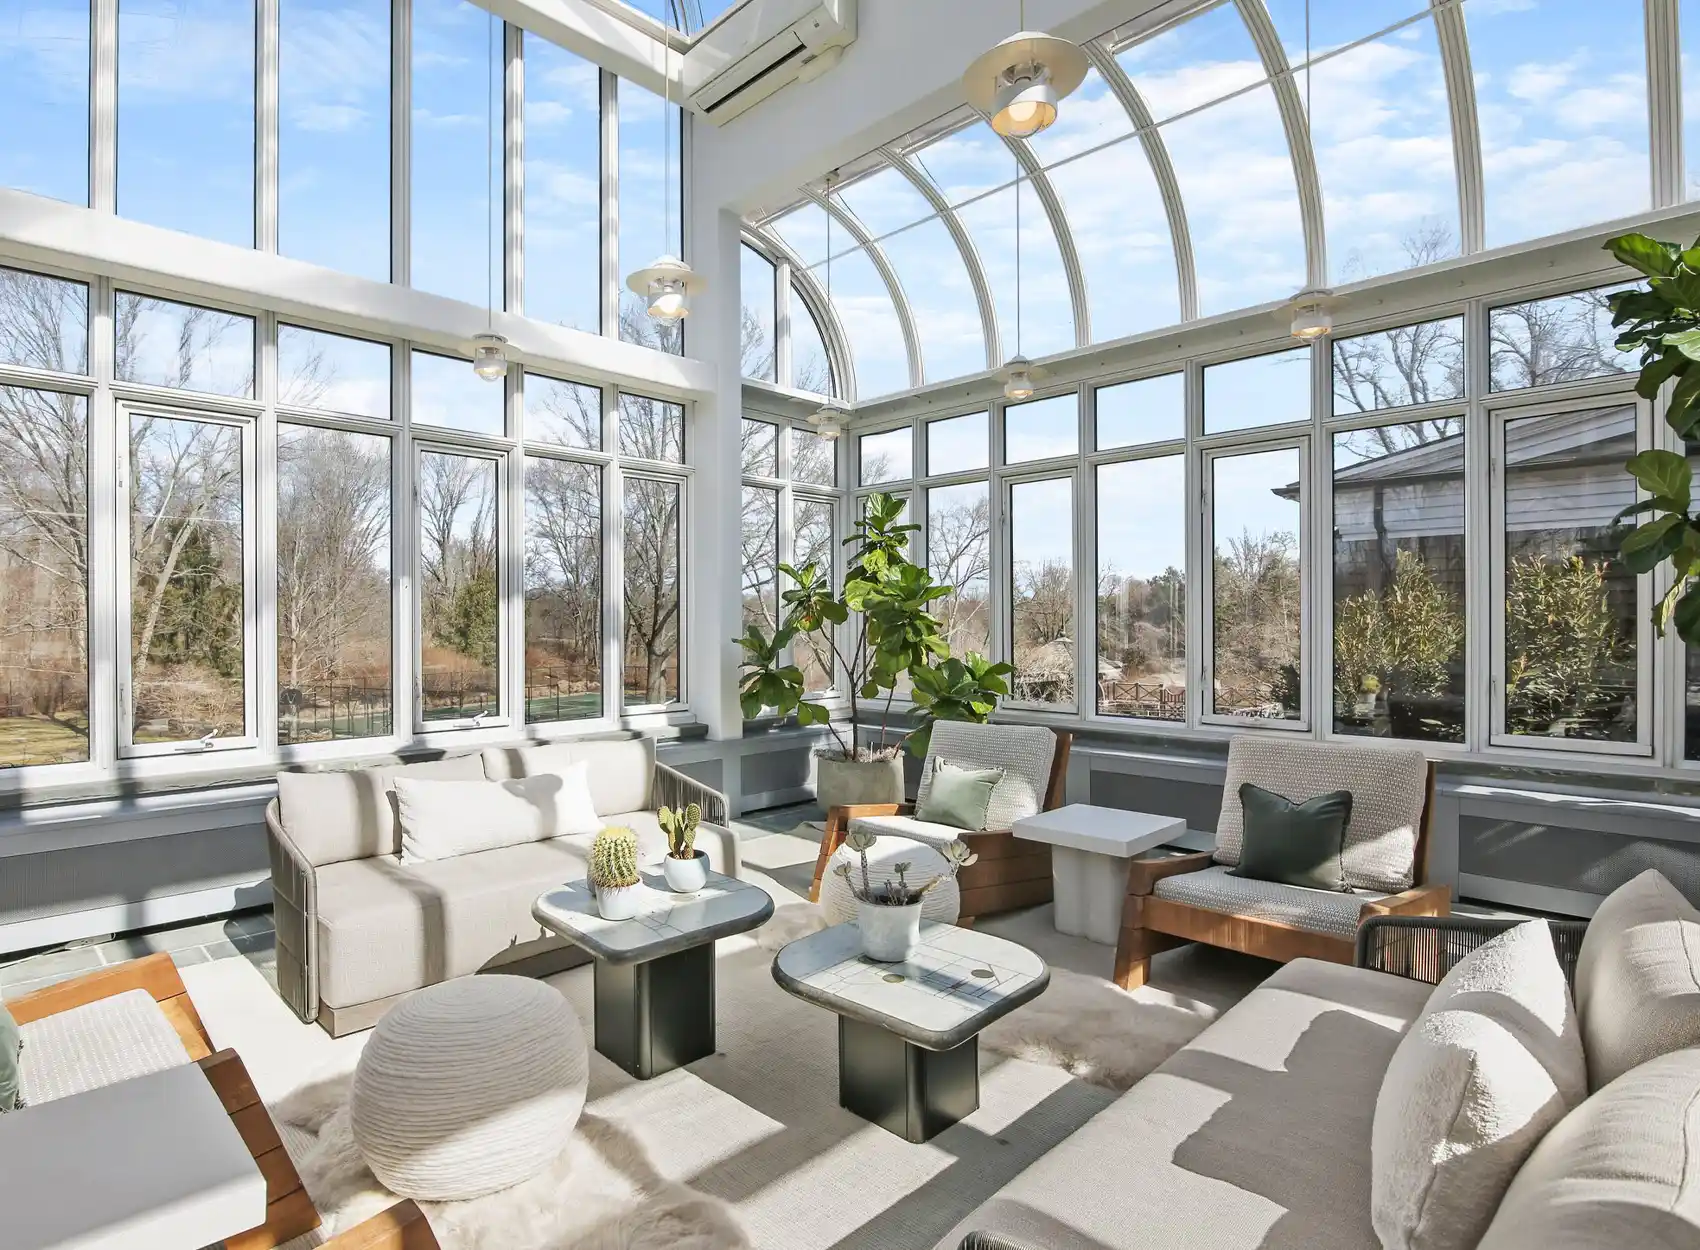 what can you use a sunroom for 2.0